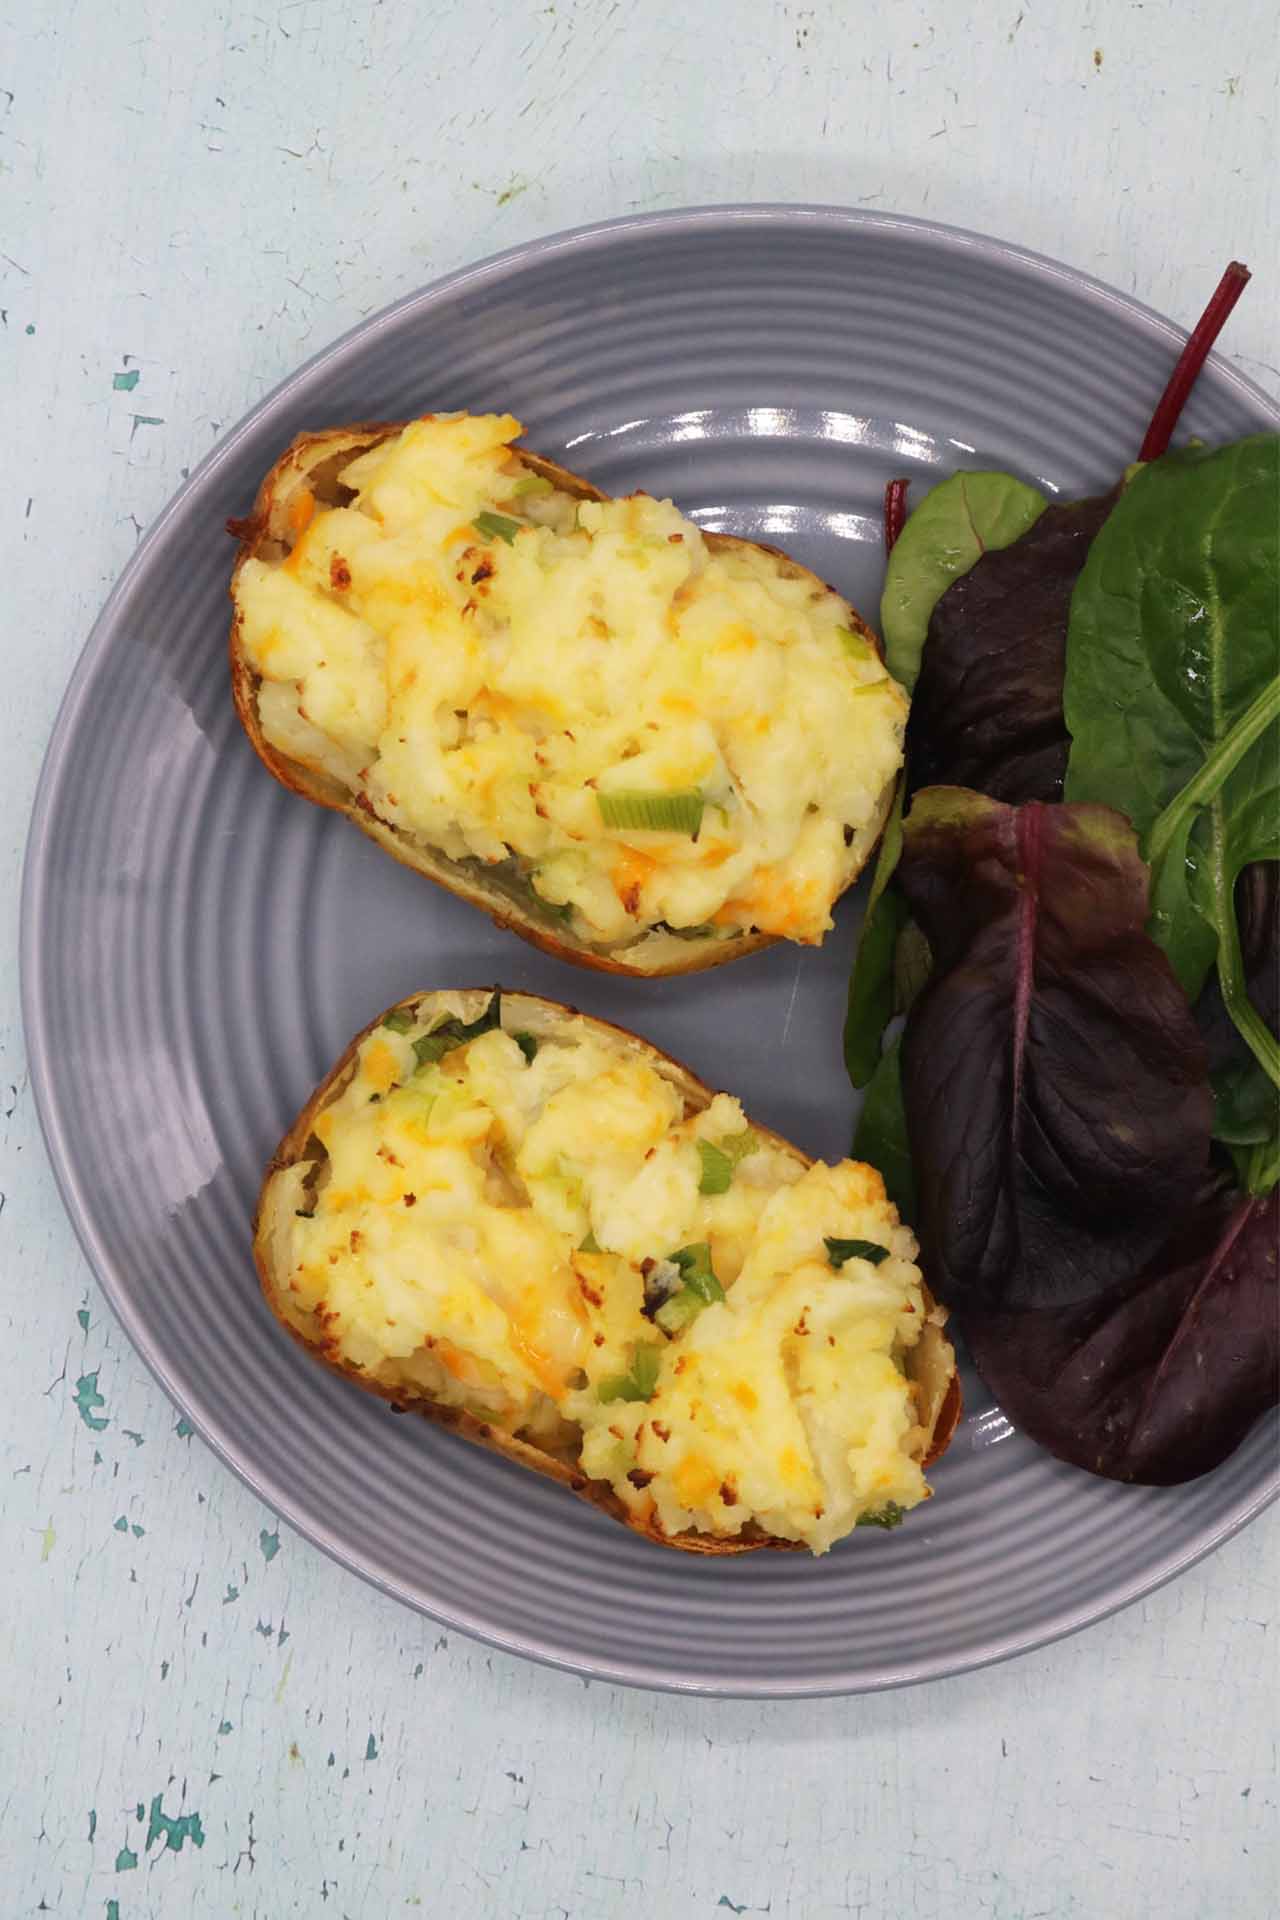 Cheese and Spring Onion Baked Potato, Cheese and Spring Onion Baked Potato